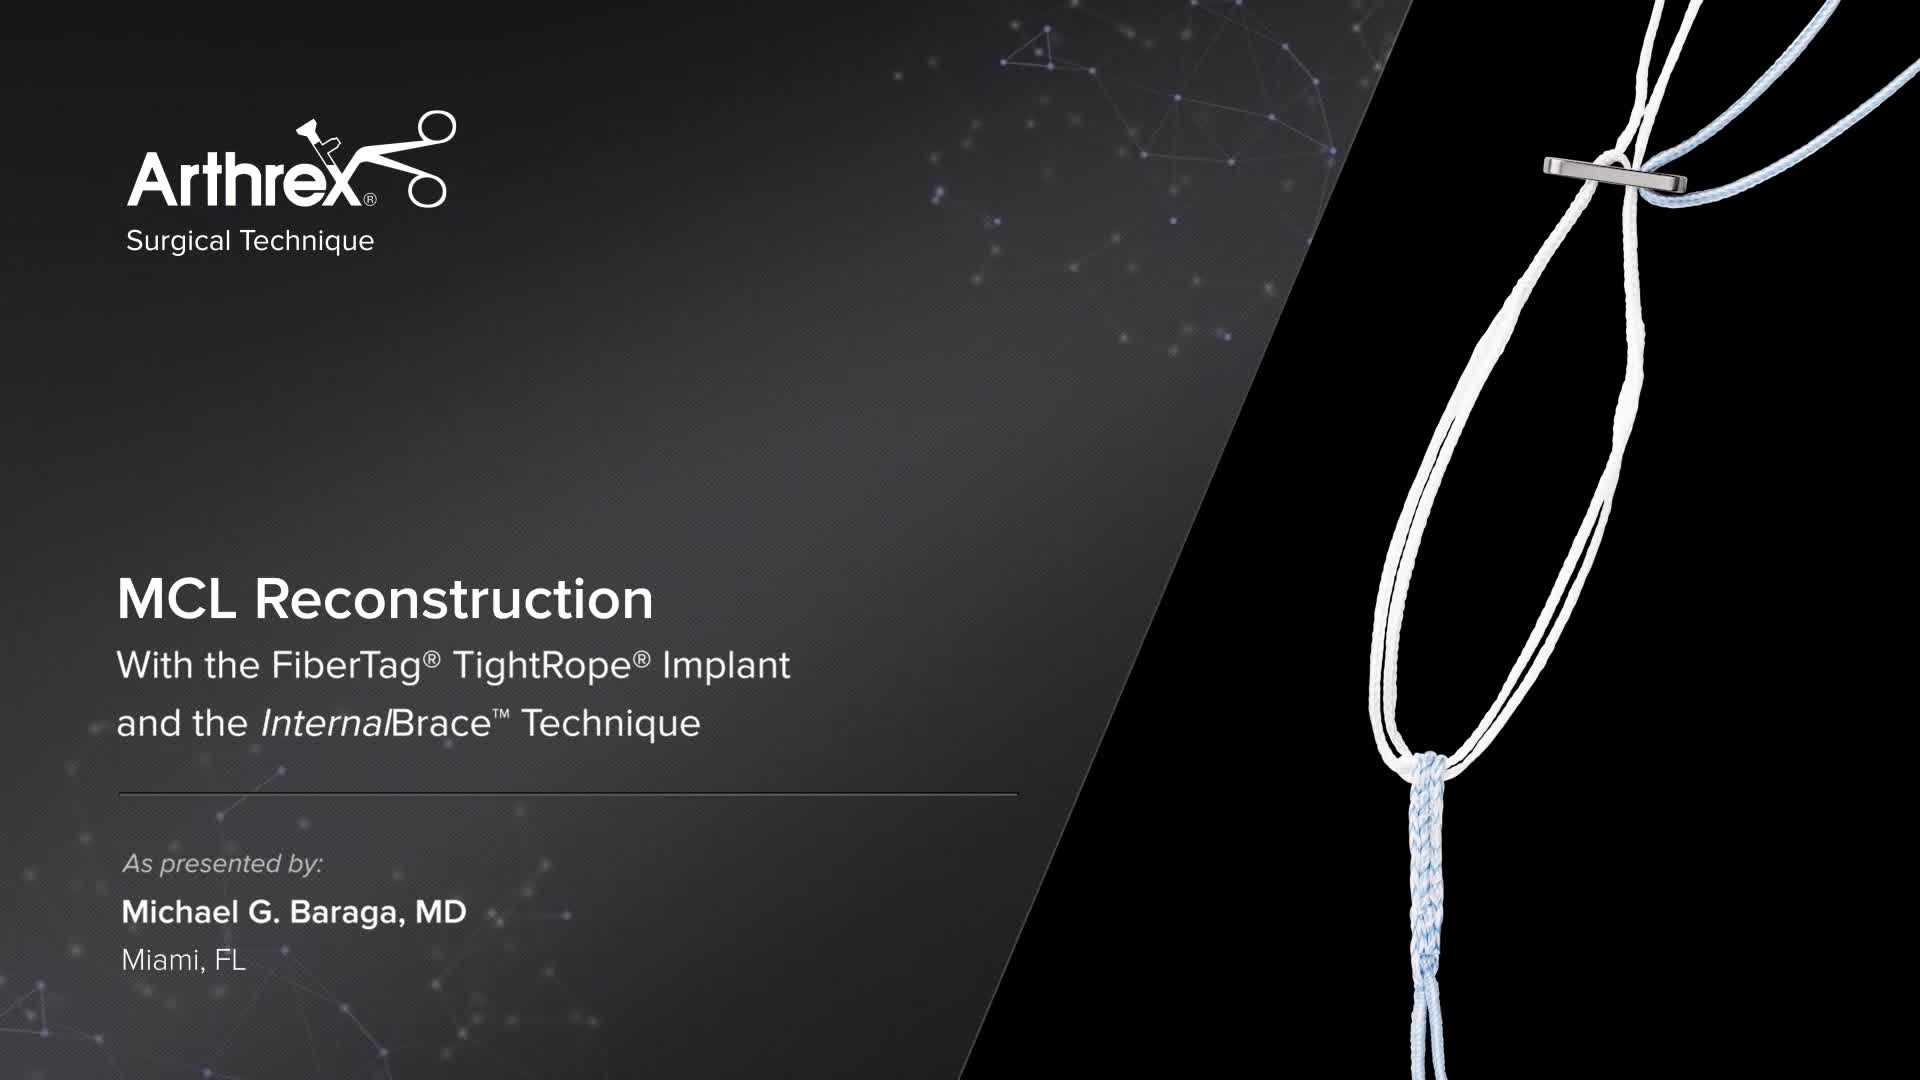 Arthrex - MCL Reconstruction With the FiberTag® TightRope® Implant